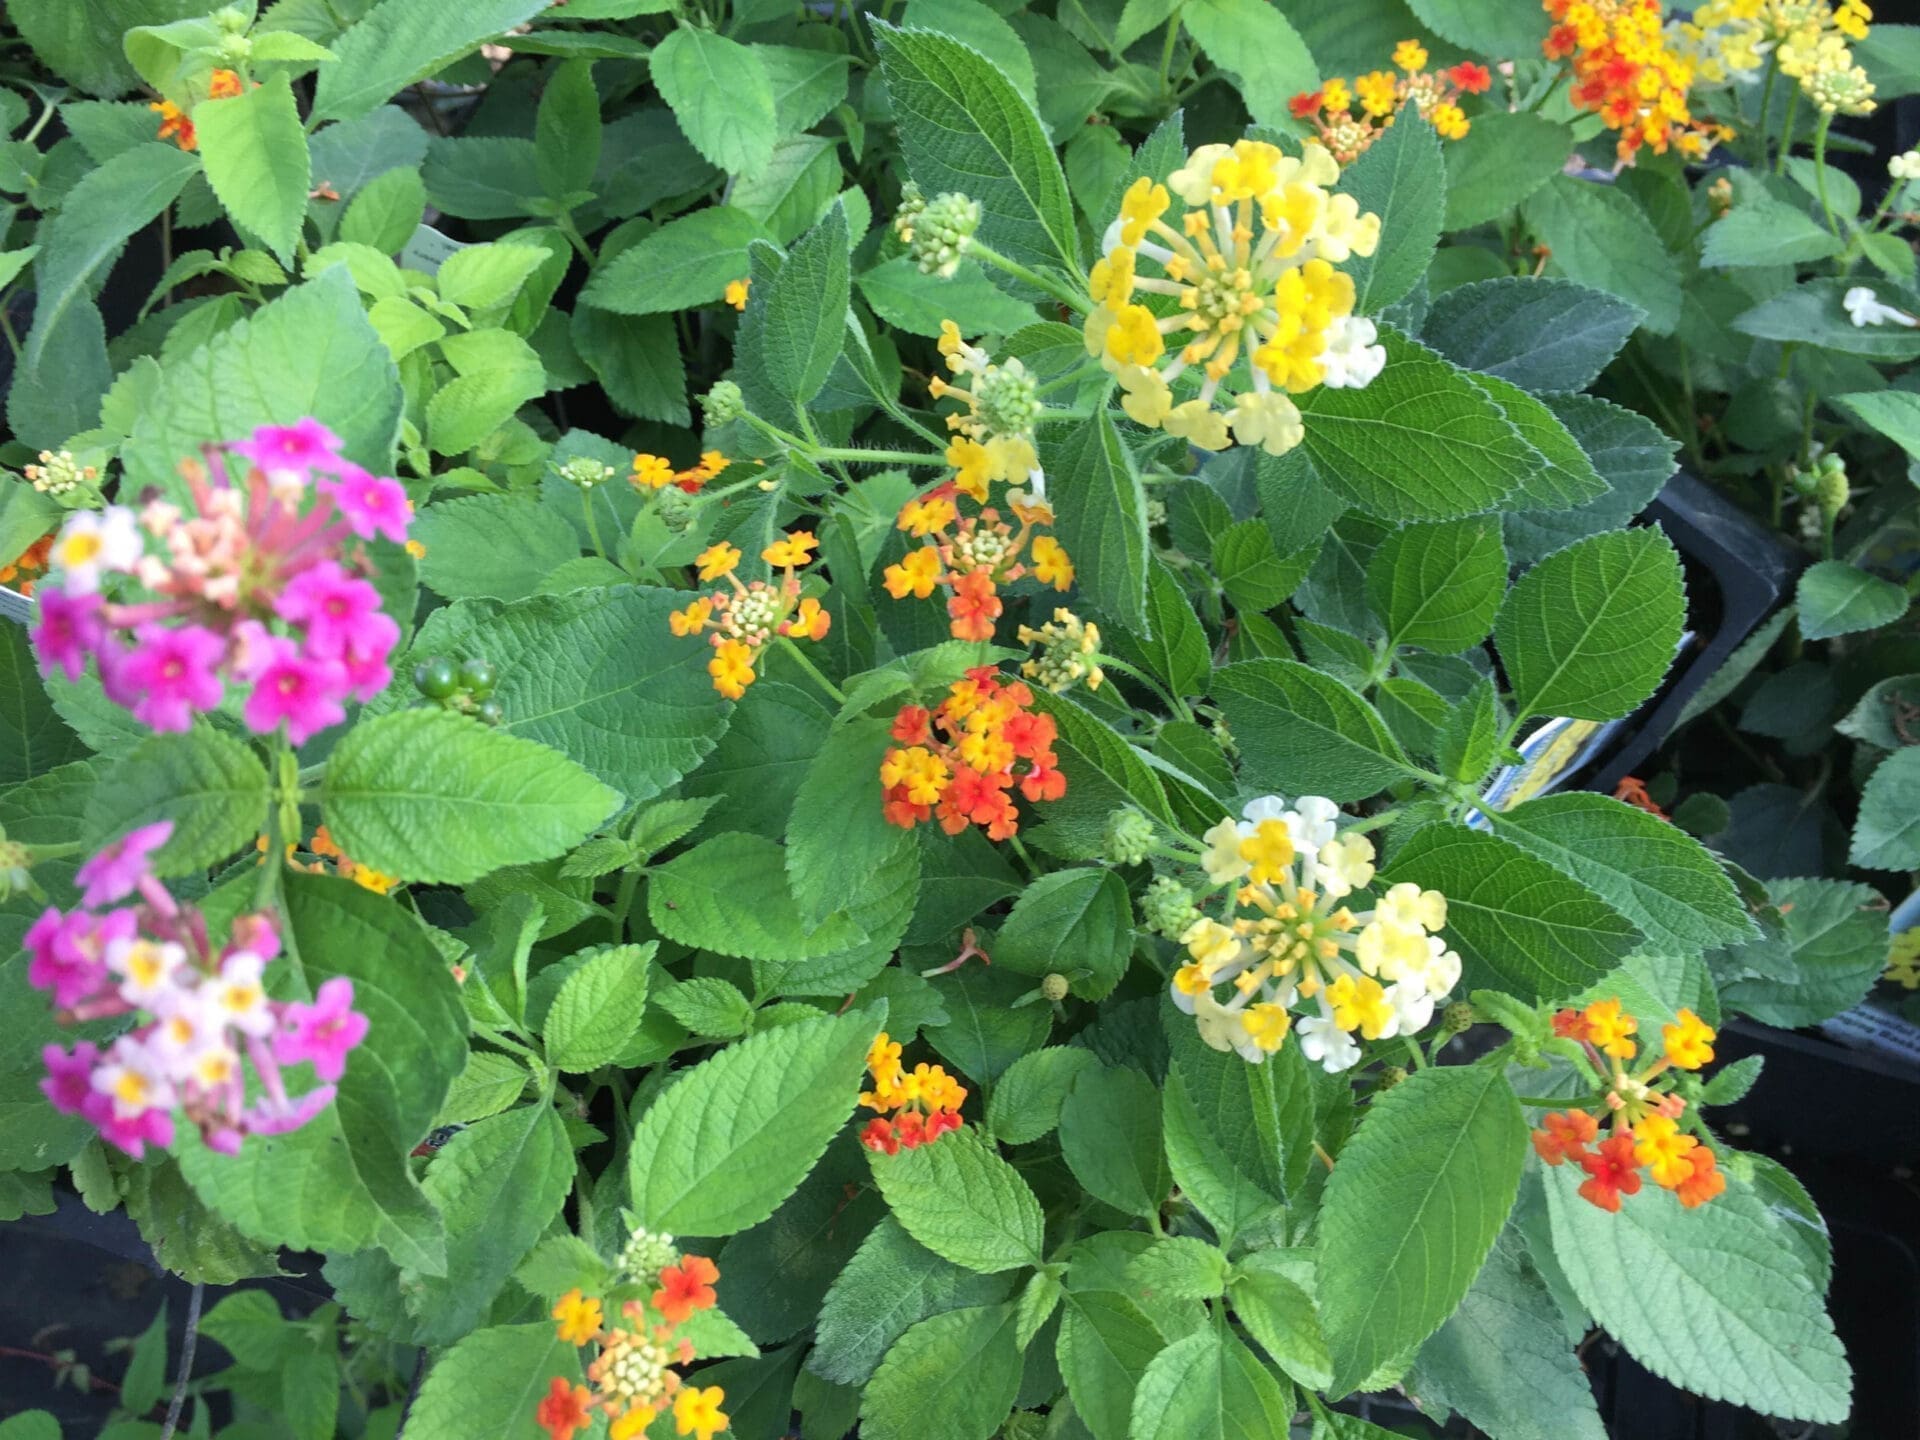 2 Each 3” to 7” Tall in 4 inch Pots Live Plants Natural Mosquito Garden Premium Plants Two Lantana Camara Flowers Not Seeds Assorted Colors Attract Hummingbirds & Butterflies 